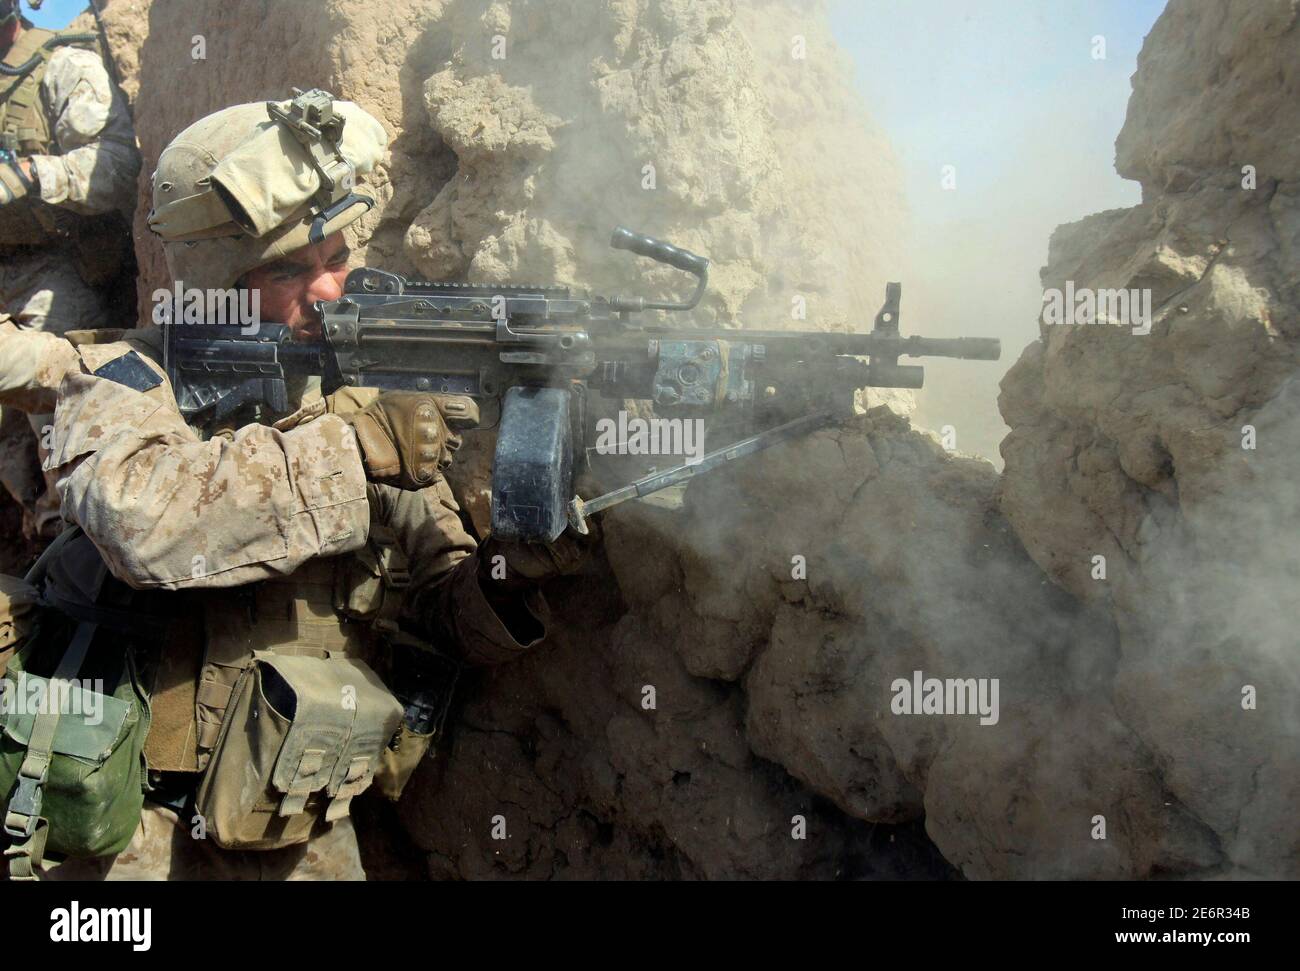 A U.S. Marine from Bravo Company of the 1st Battalion, 6th Marines fires his weapon at Taliban fighters in Marjah in Helmand province, southern Afghanistan, February 22, 2010.   REUTERS/Goran Tomasevic  (AFGHANISTAN - Tags: CIVIL UNREST POLITICS) Stock Photo